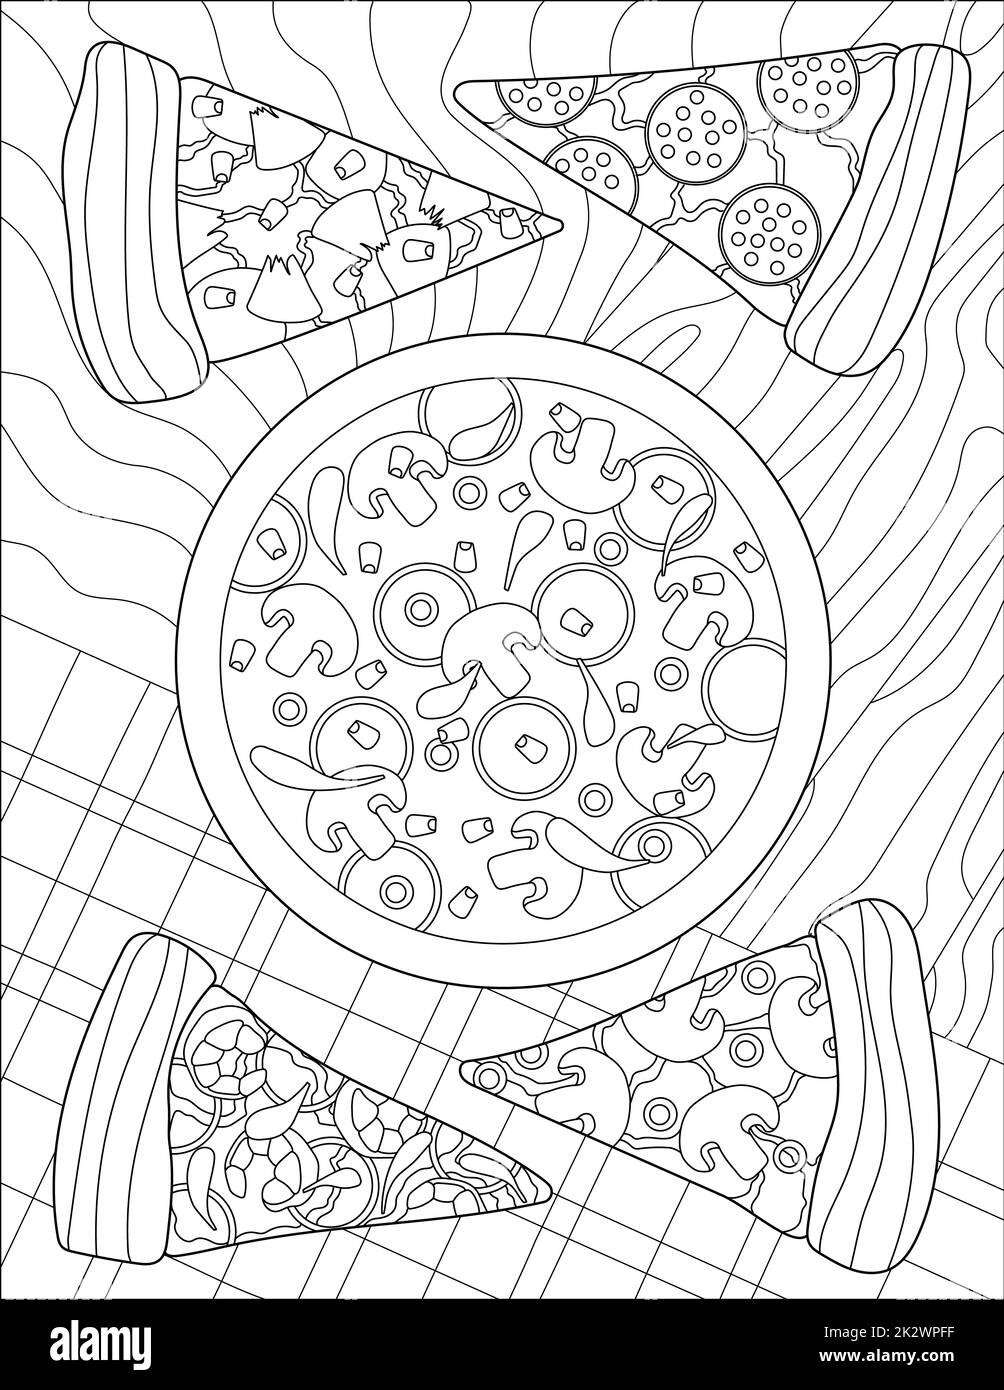 Vector line drawing large pizza four slices sitting table. Digital lineart image tasty pie meal served patterned wooden counter. Outline artwork design dinner serving. Stock Photo